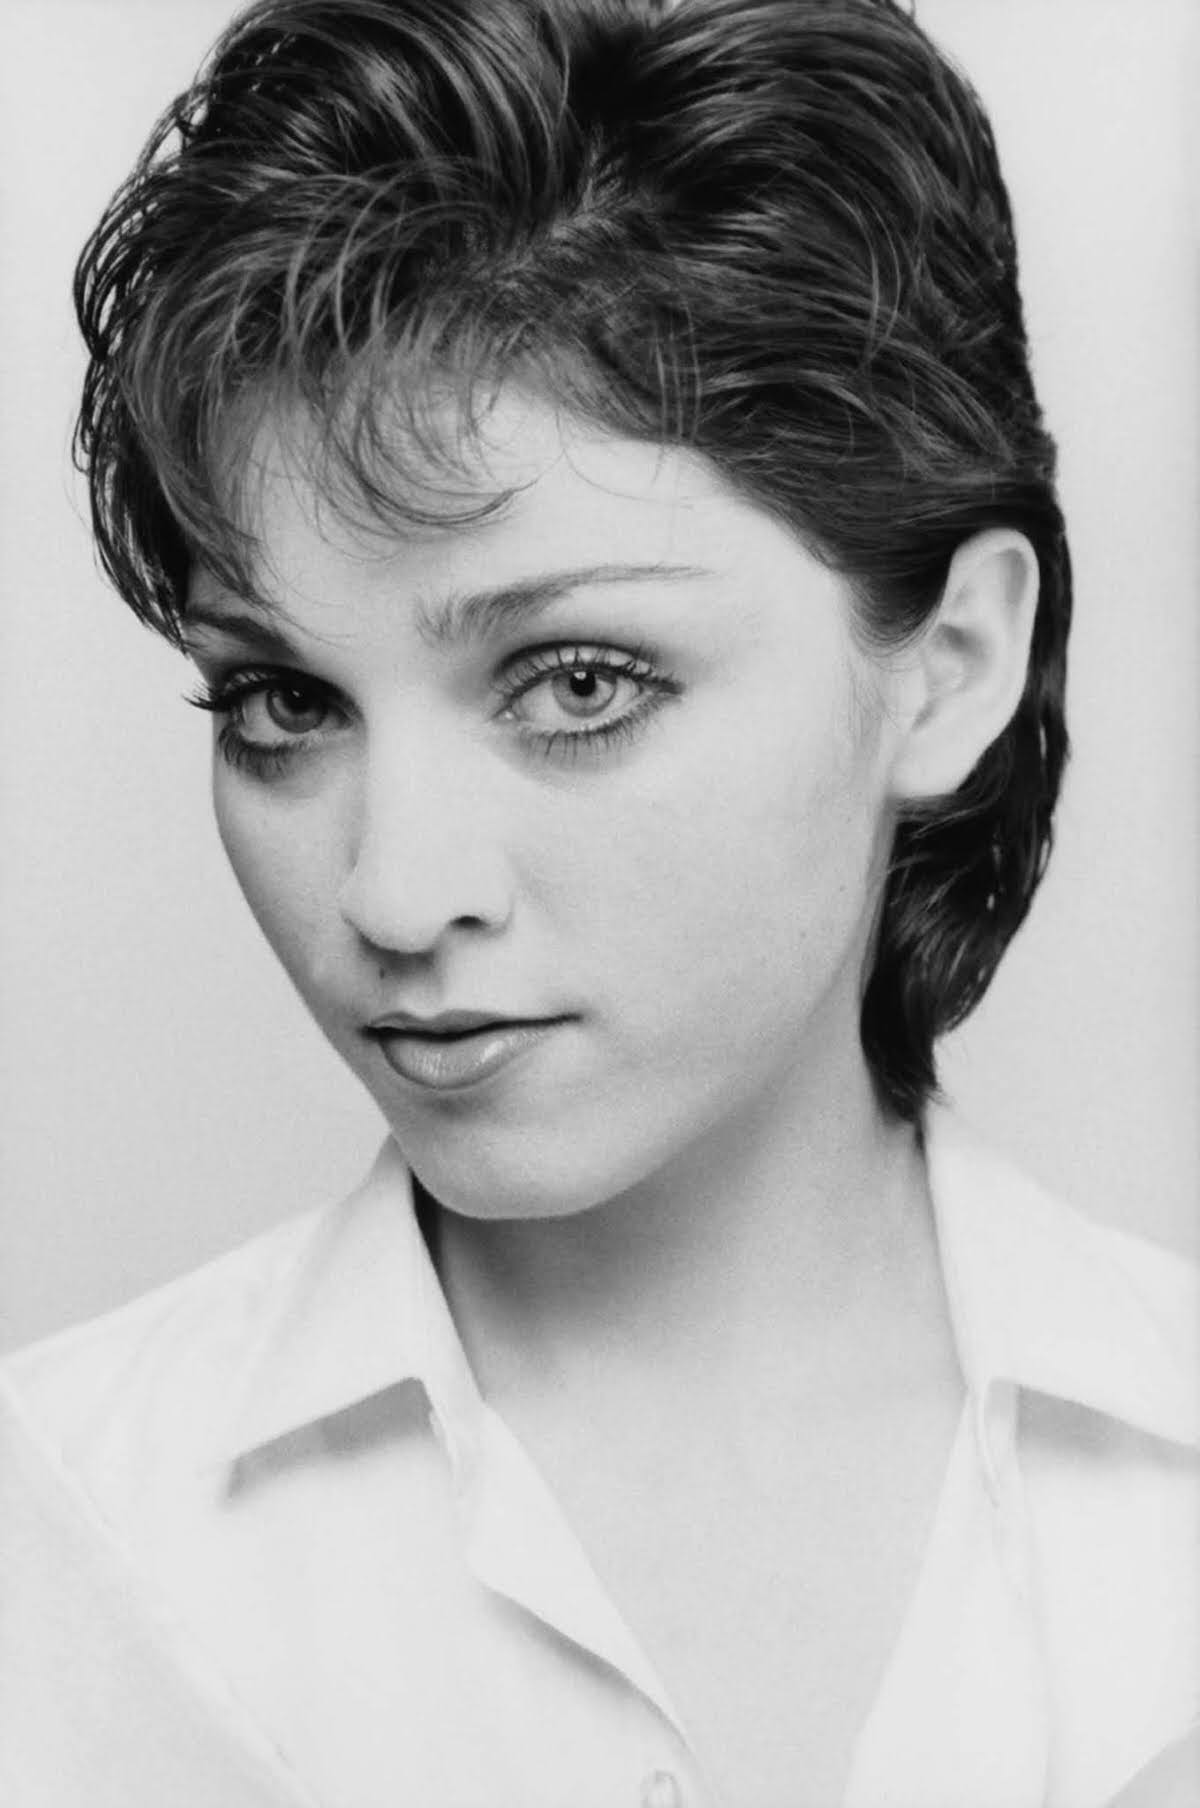 Beautiful Photos of 20-Year-old Madonna before She became a Worldwide Sensation, 1978